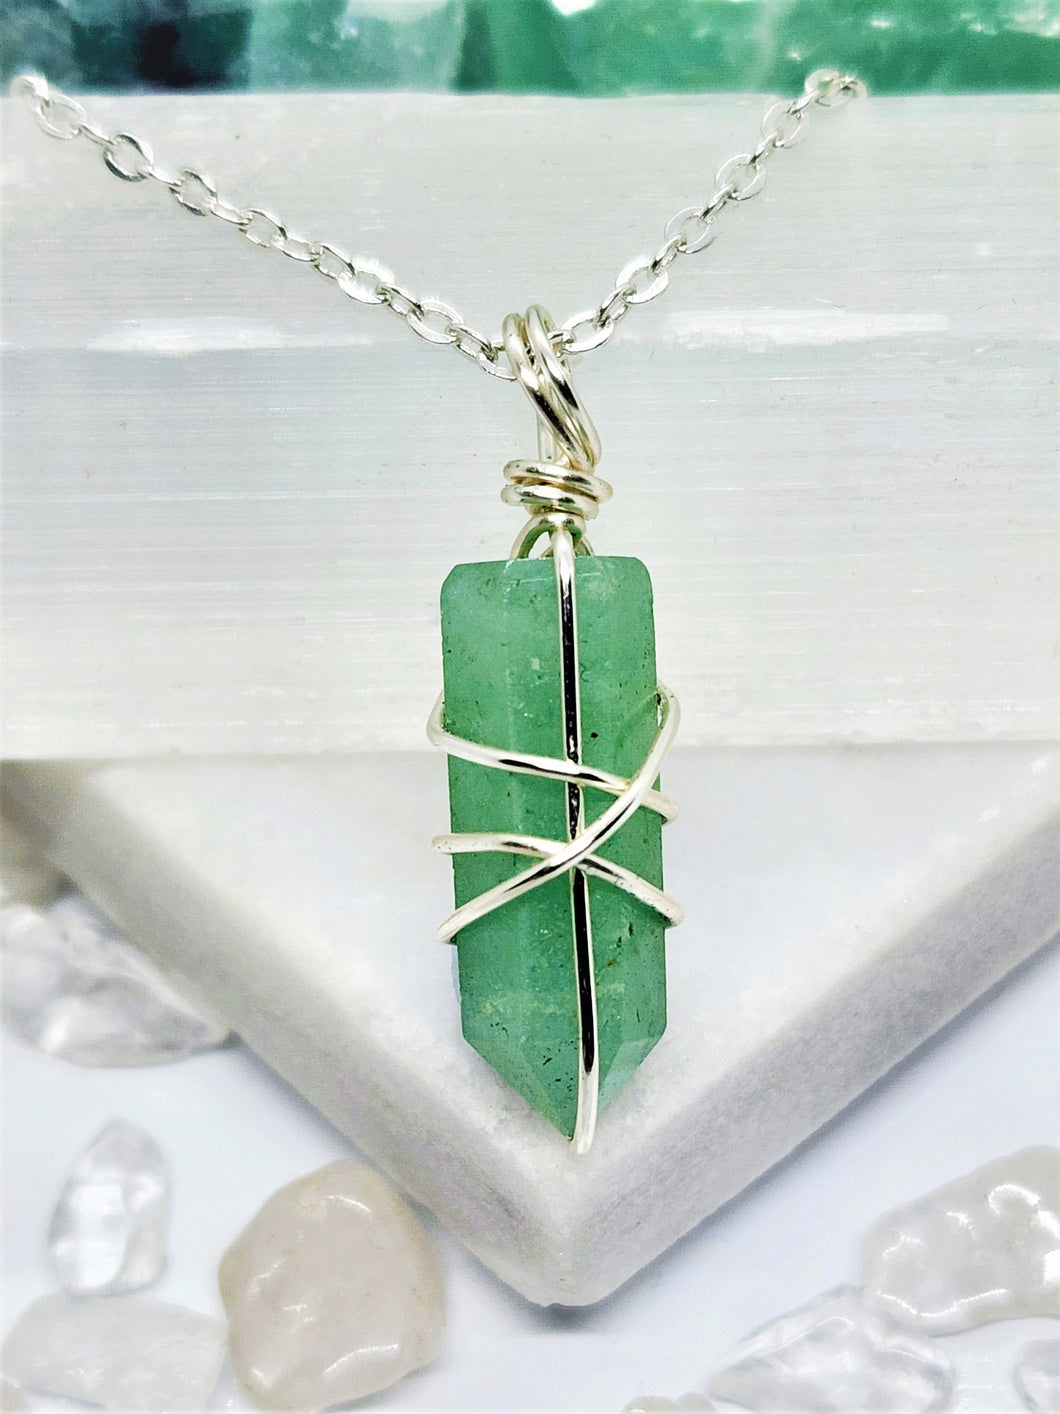 Green aventurine is renowned for its spiritual properties, thought to bring luck and success. It's often used to attract positive energies and opportunities, fostering confidence and prosperity